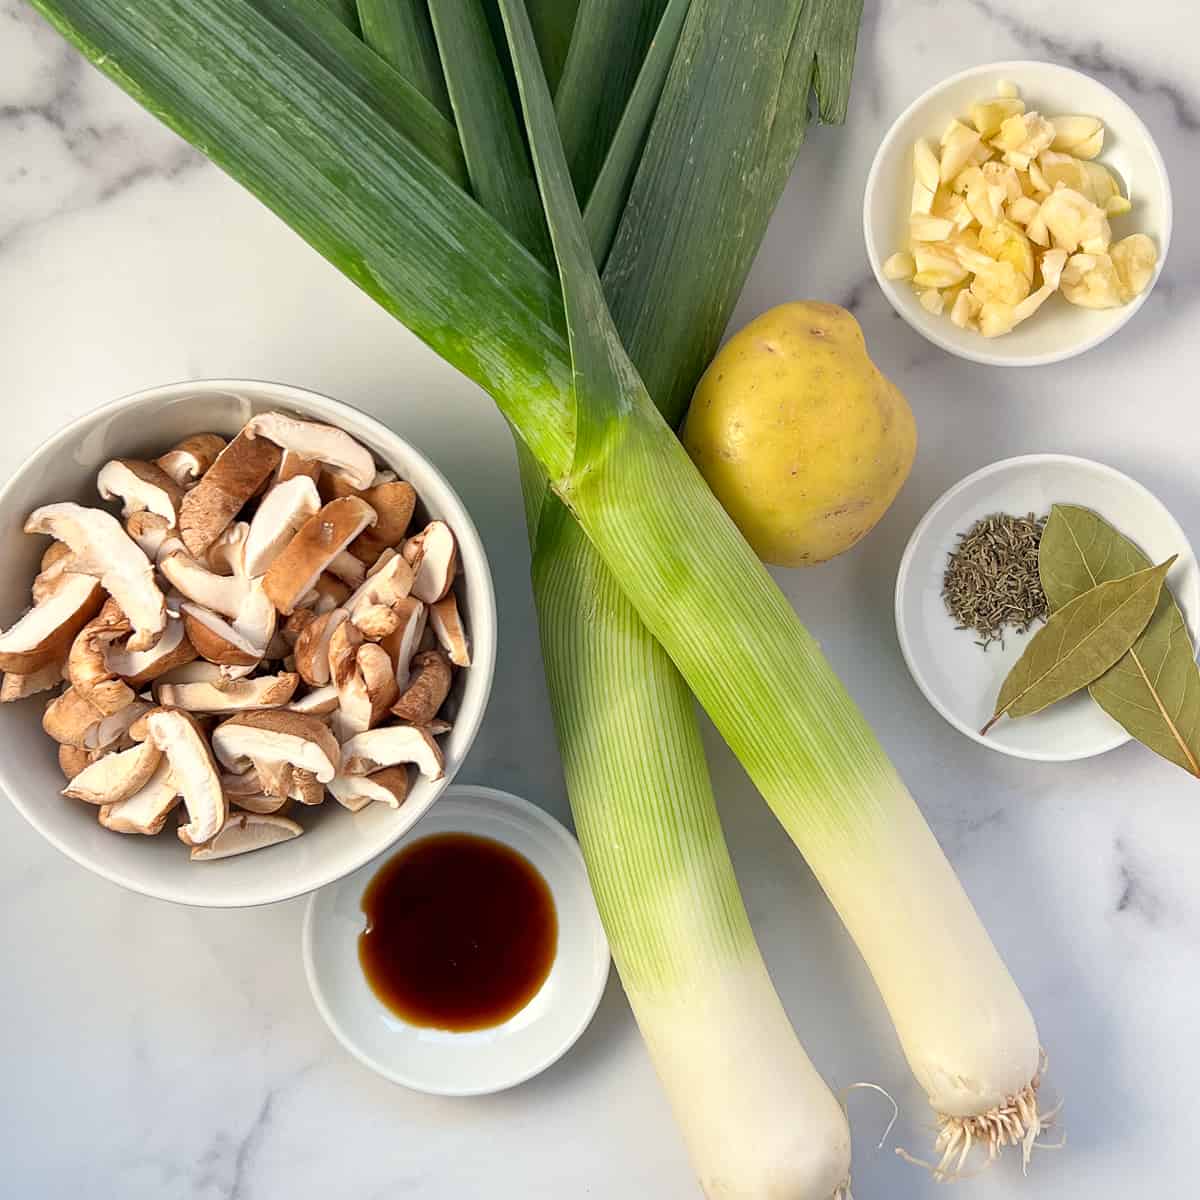 top view of key ingredients for leek and mushroom soup: leeks, chopped mushrooms, chopped garlic, potato, spices and coconut aminos